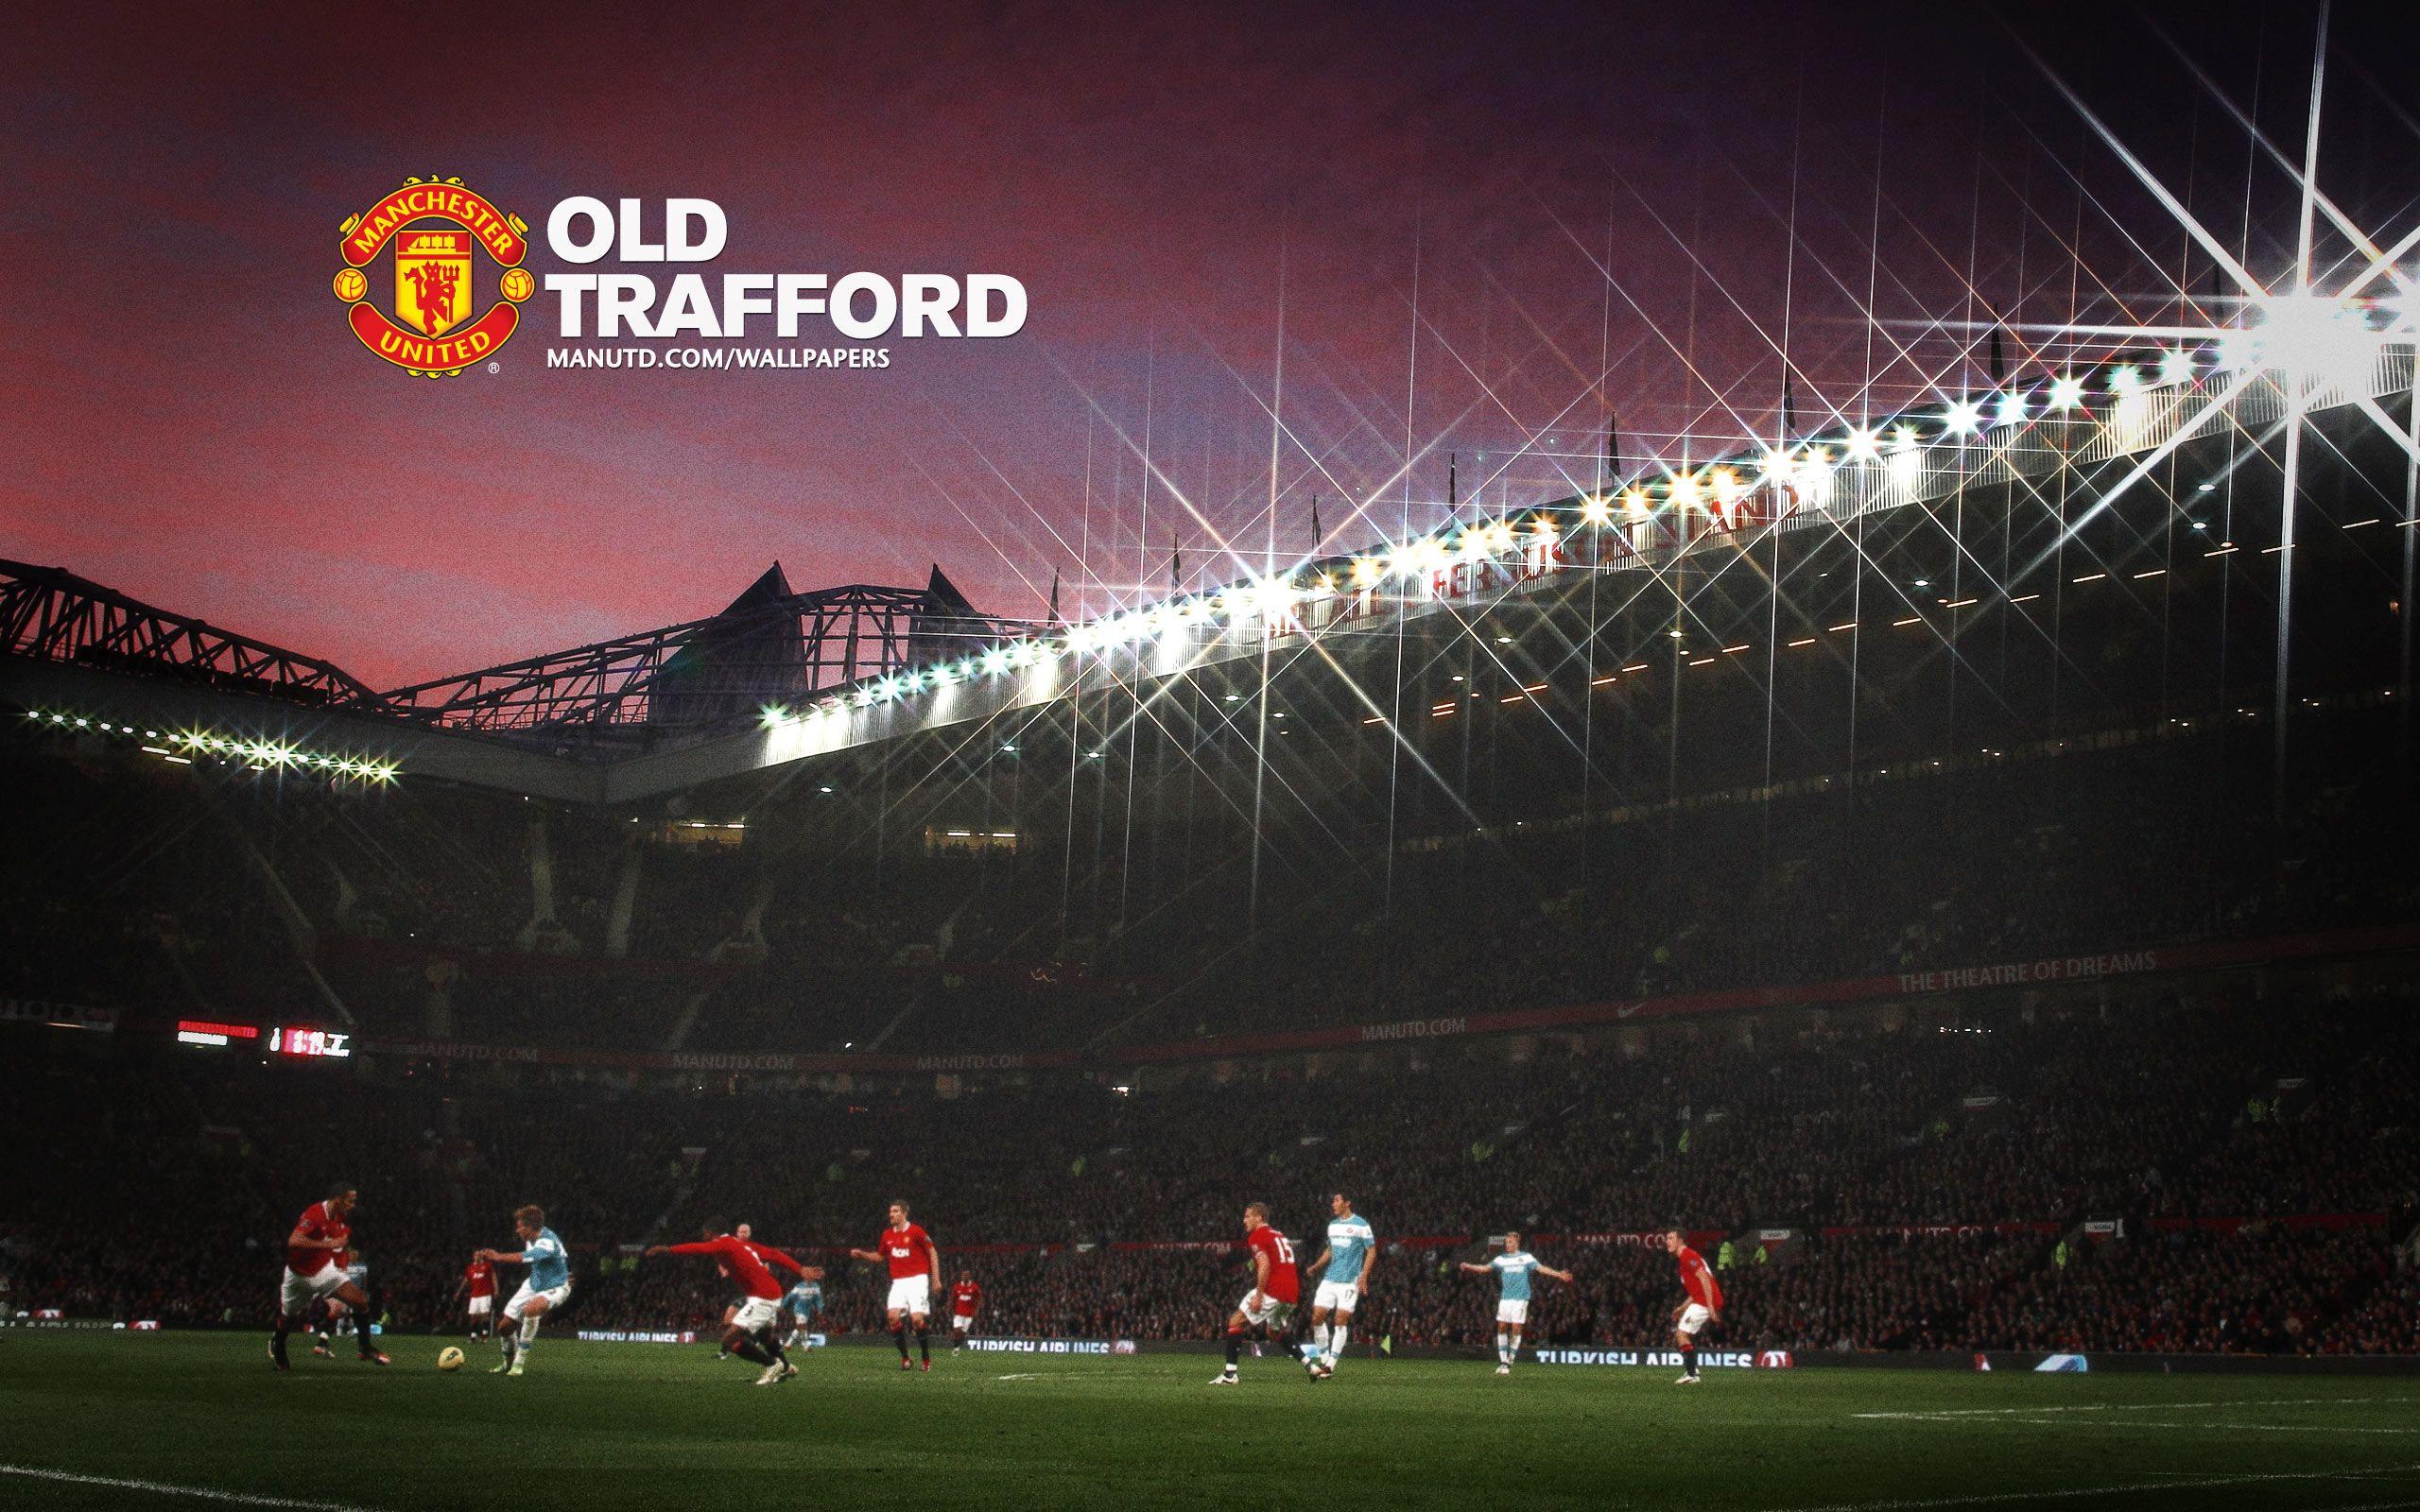 Manchester United Wallpaper: Manchester United Old Trafford Wallpaper